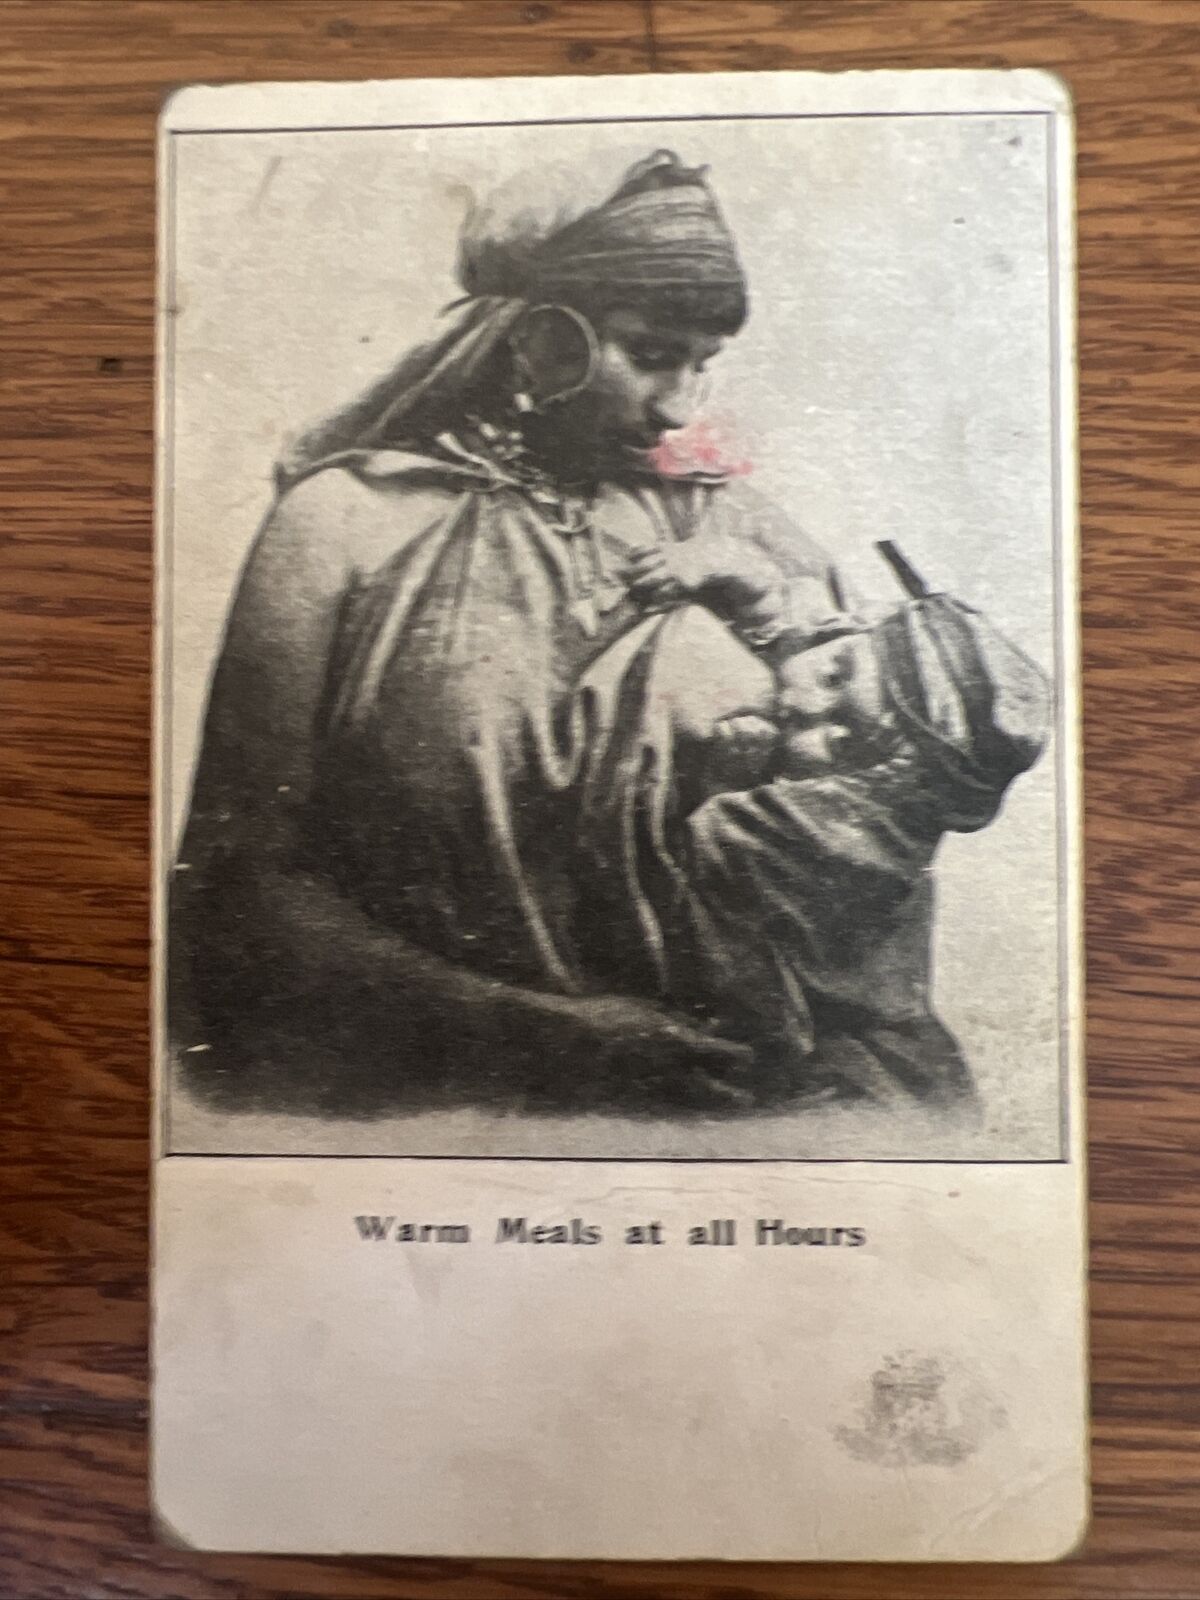 'Warm Meals at All Hours' RPPC Native Woman Breastfeeding Postcard c1900 201a